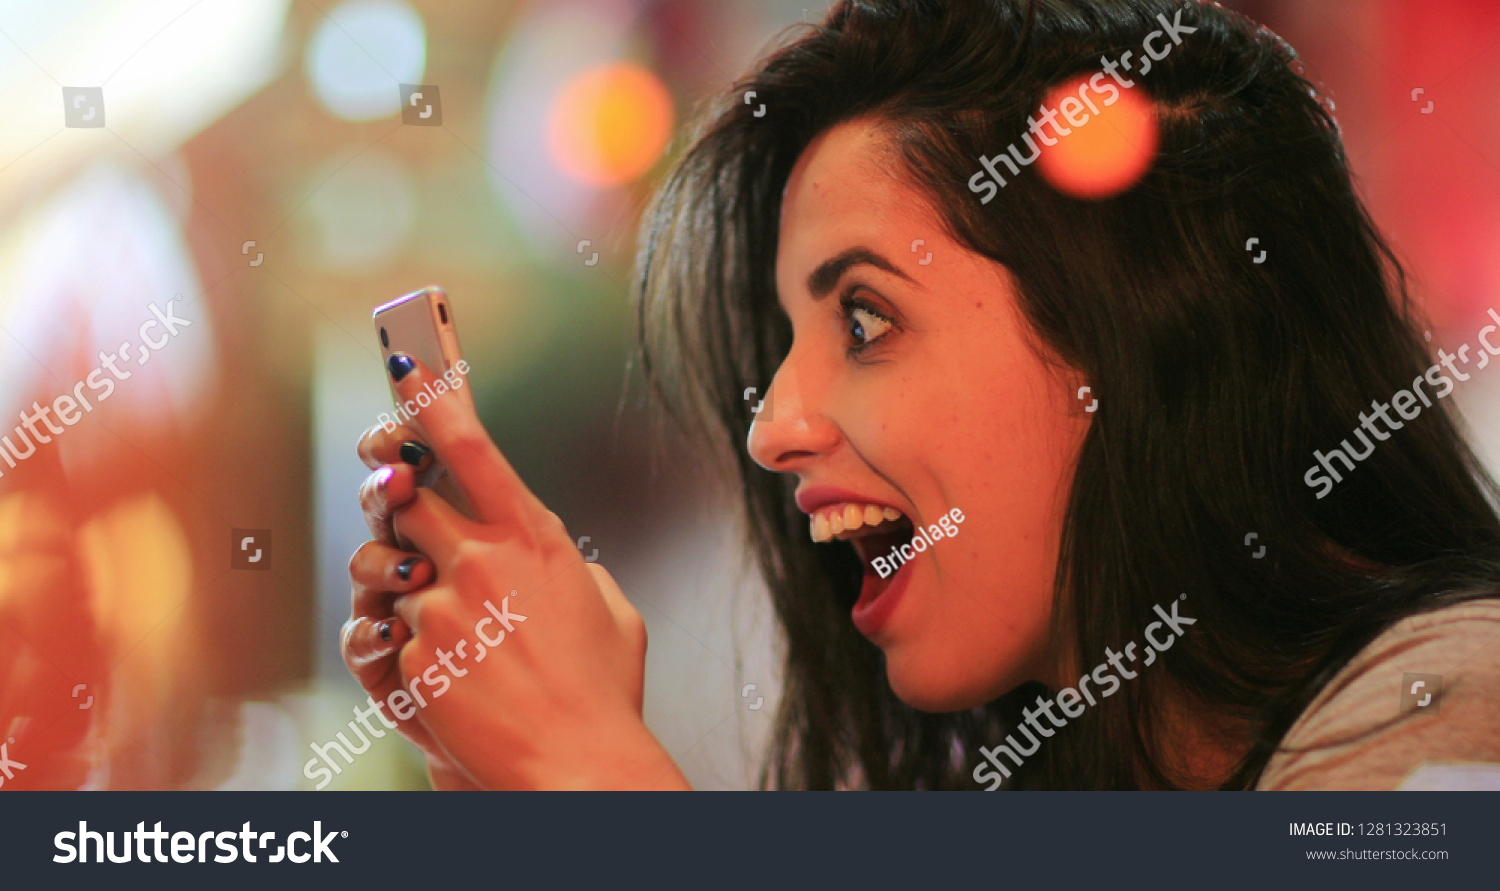 Candid surprise reaction of girl in front of cellphone reading text message smiling and laughing at night at coffee shop #1281323851